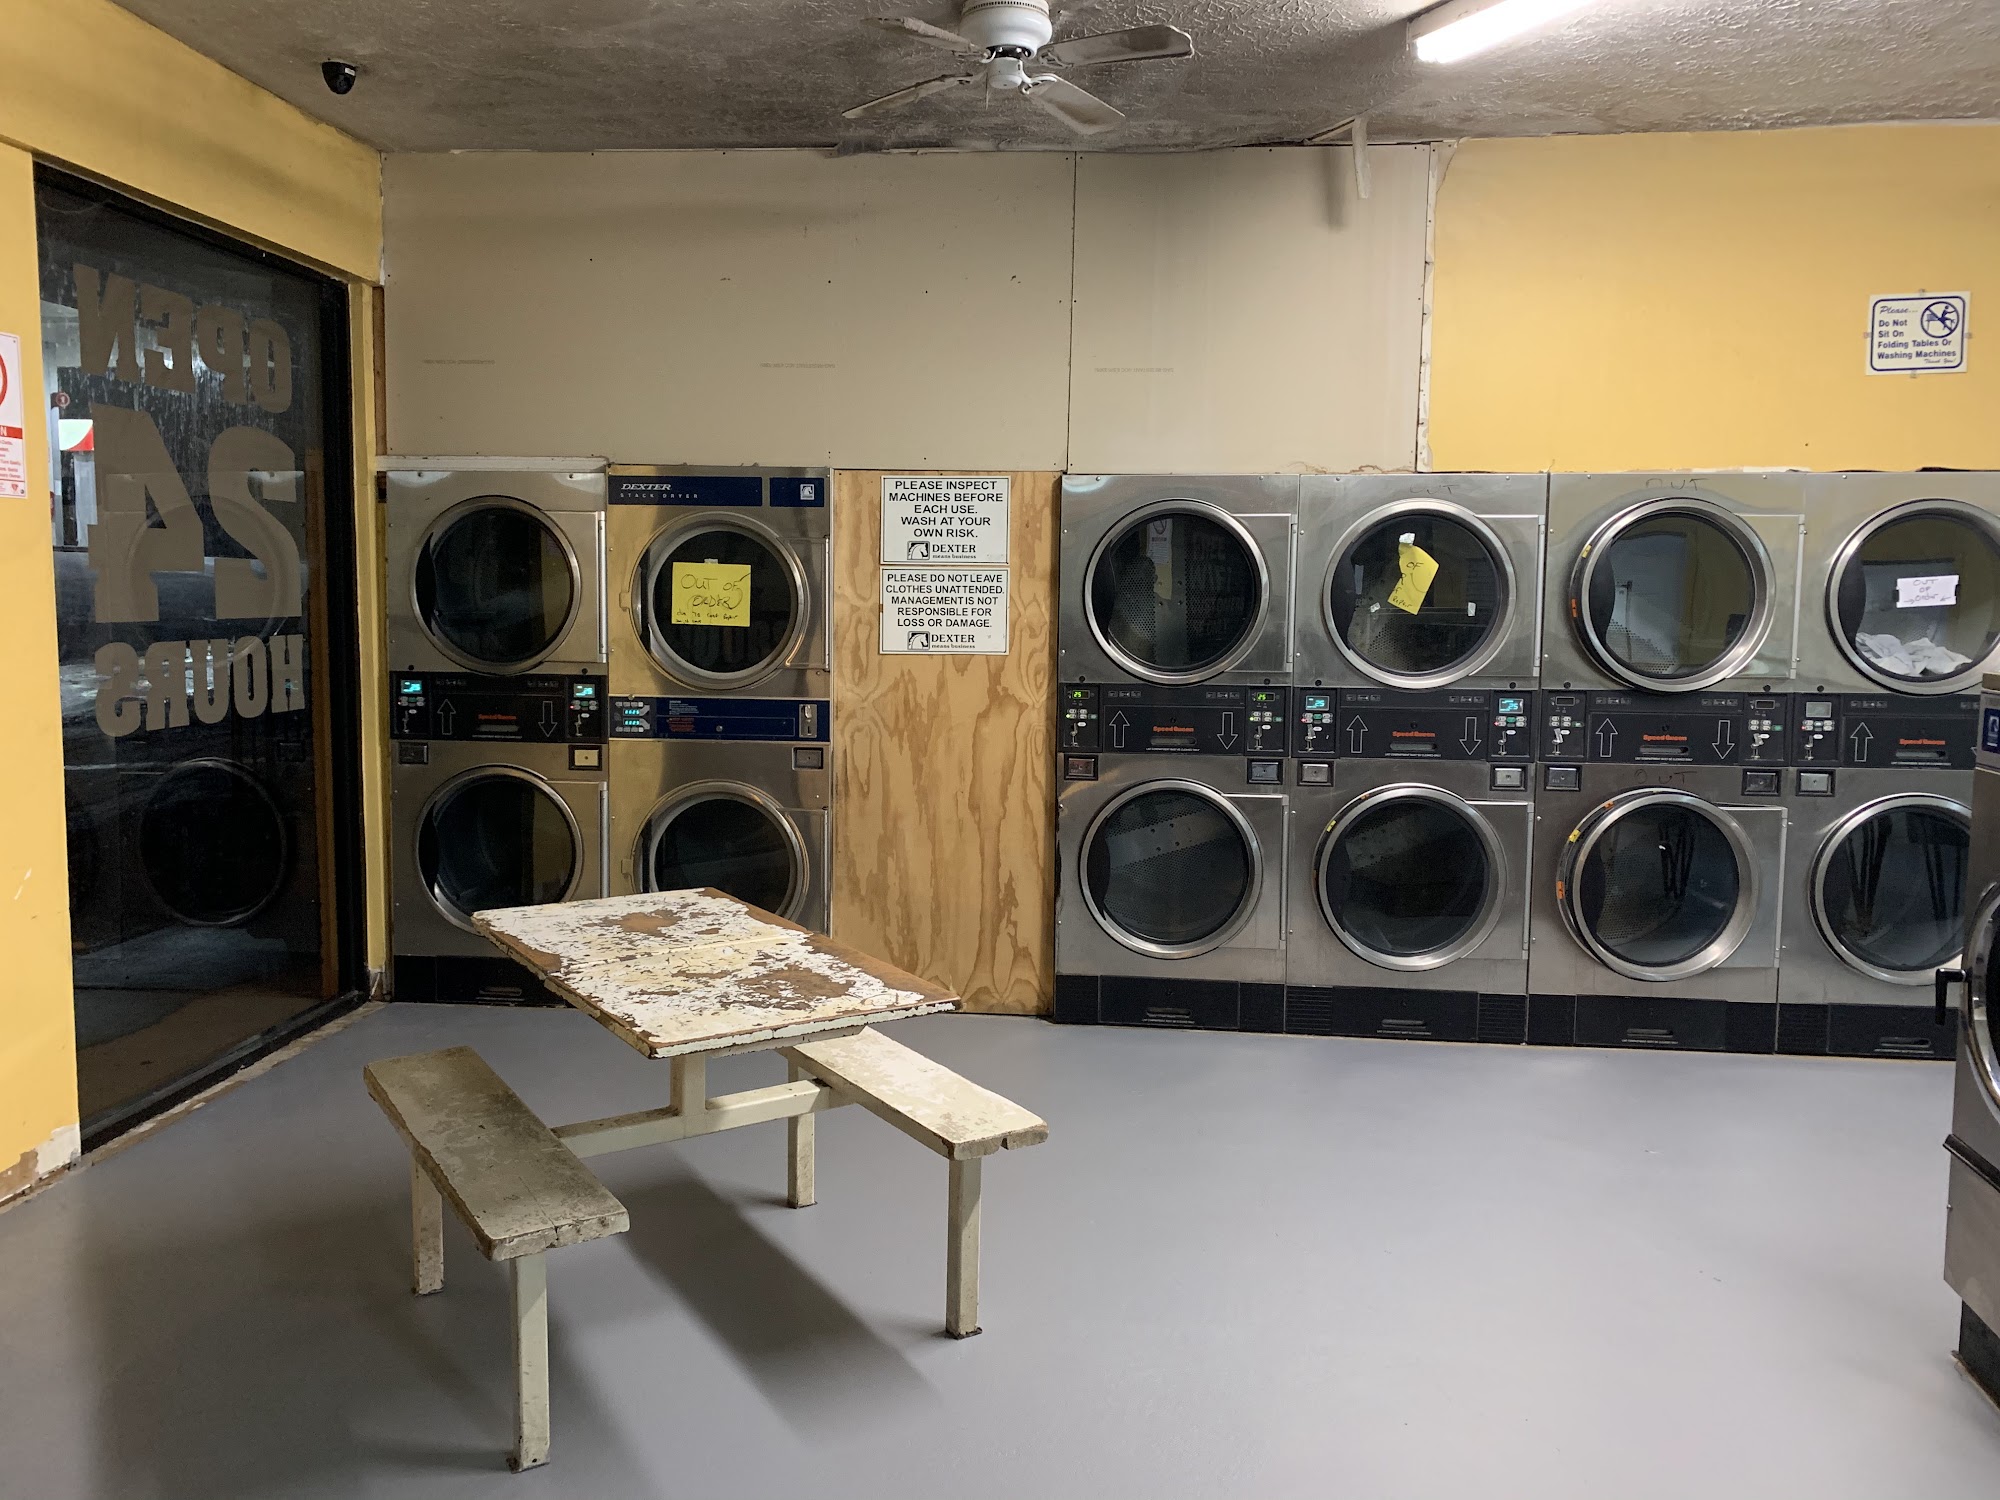 H & H Coin Laundry